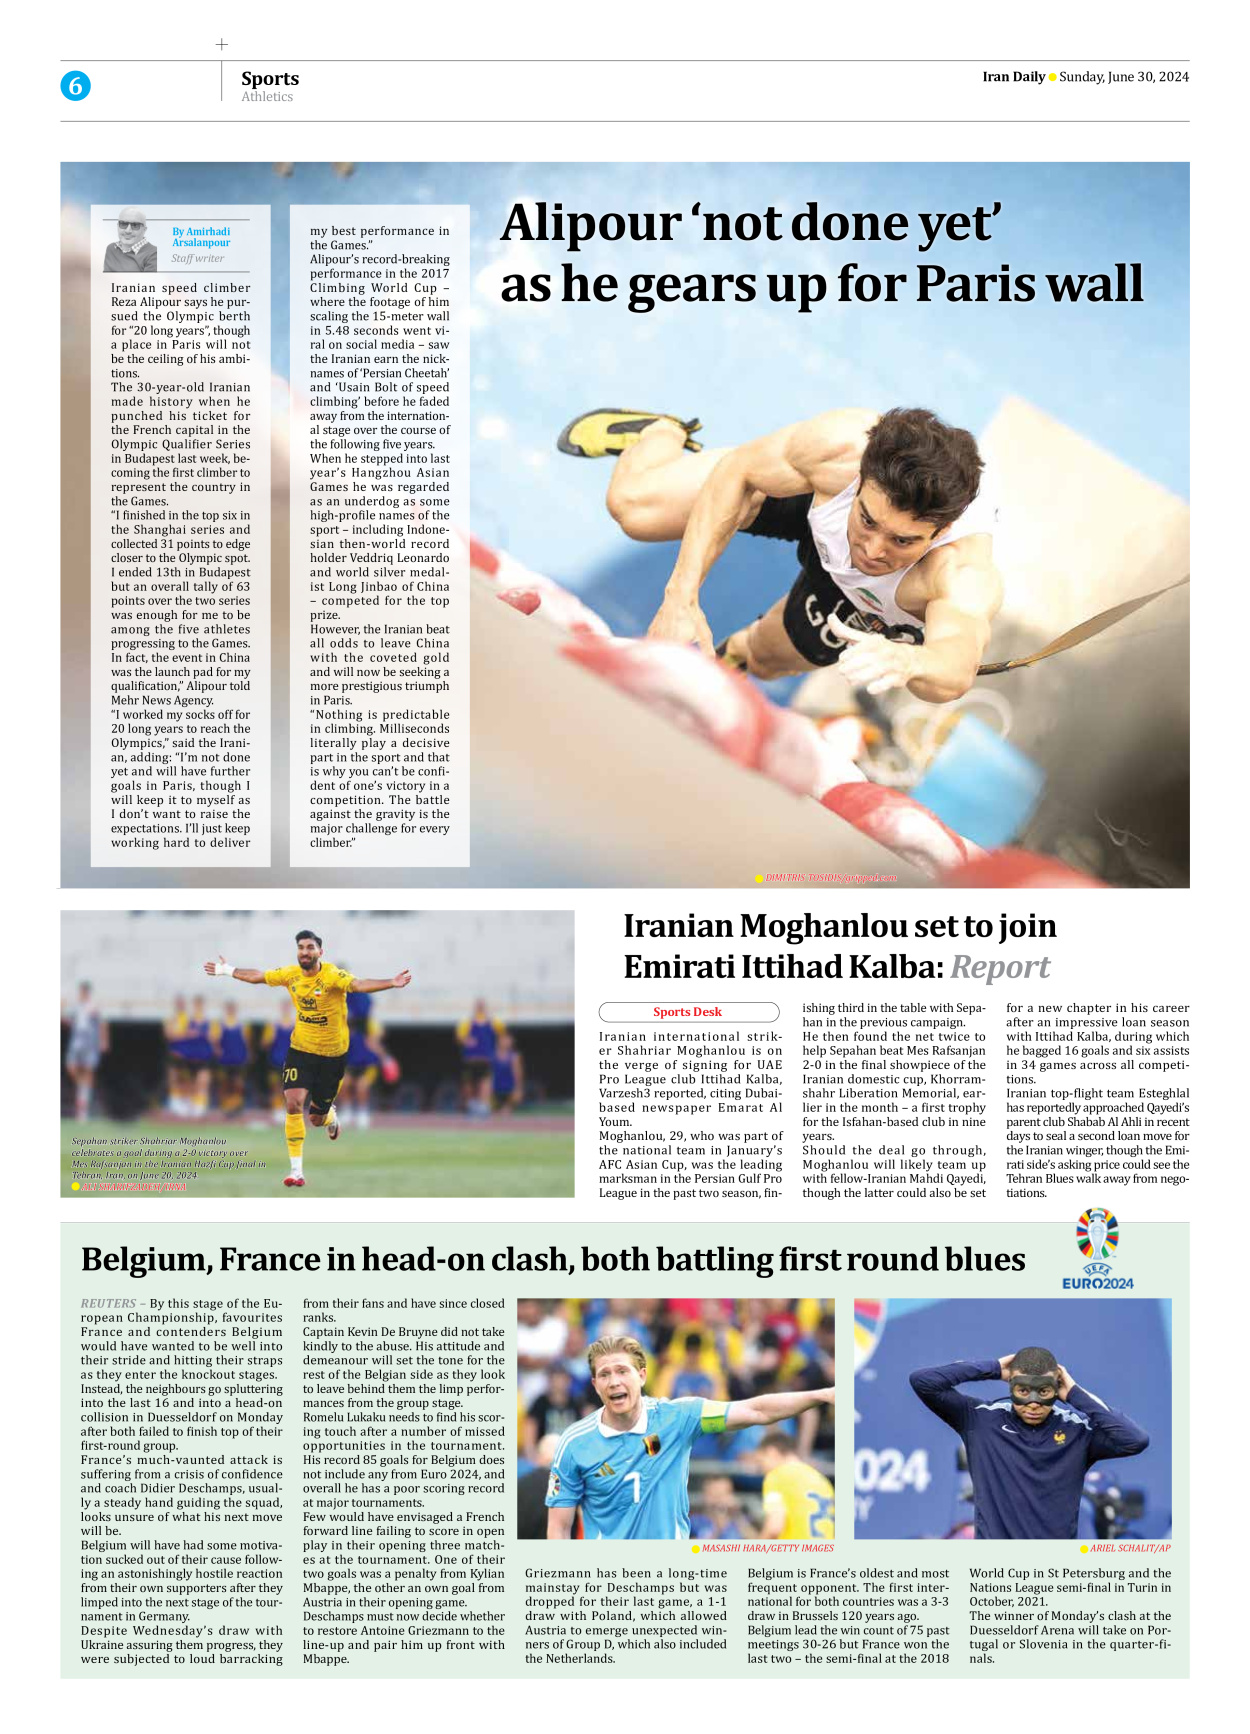 Iran Daily - Number Seven Thousand Five Hundred and Ninety Two - 30 June 2024 - Page 6